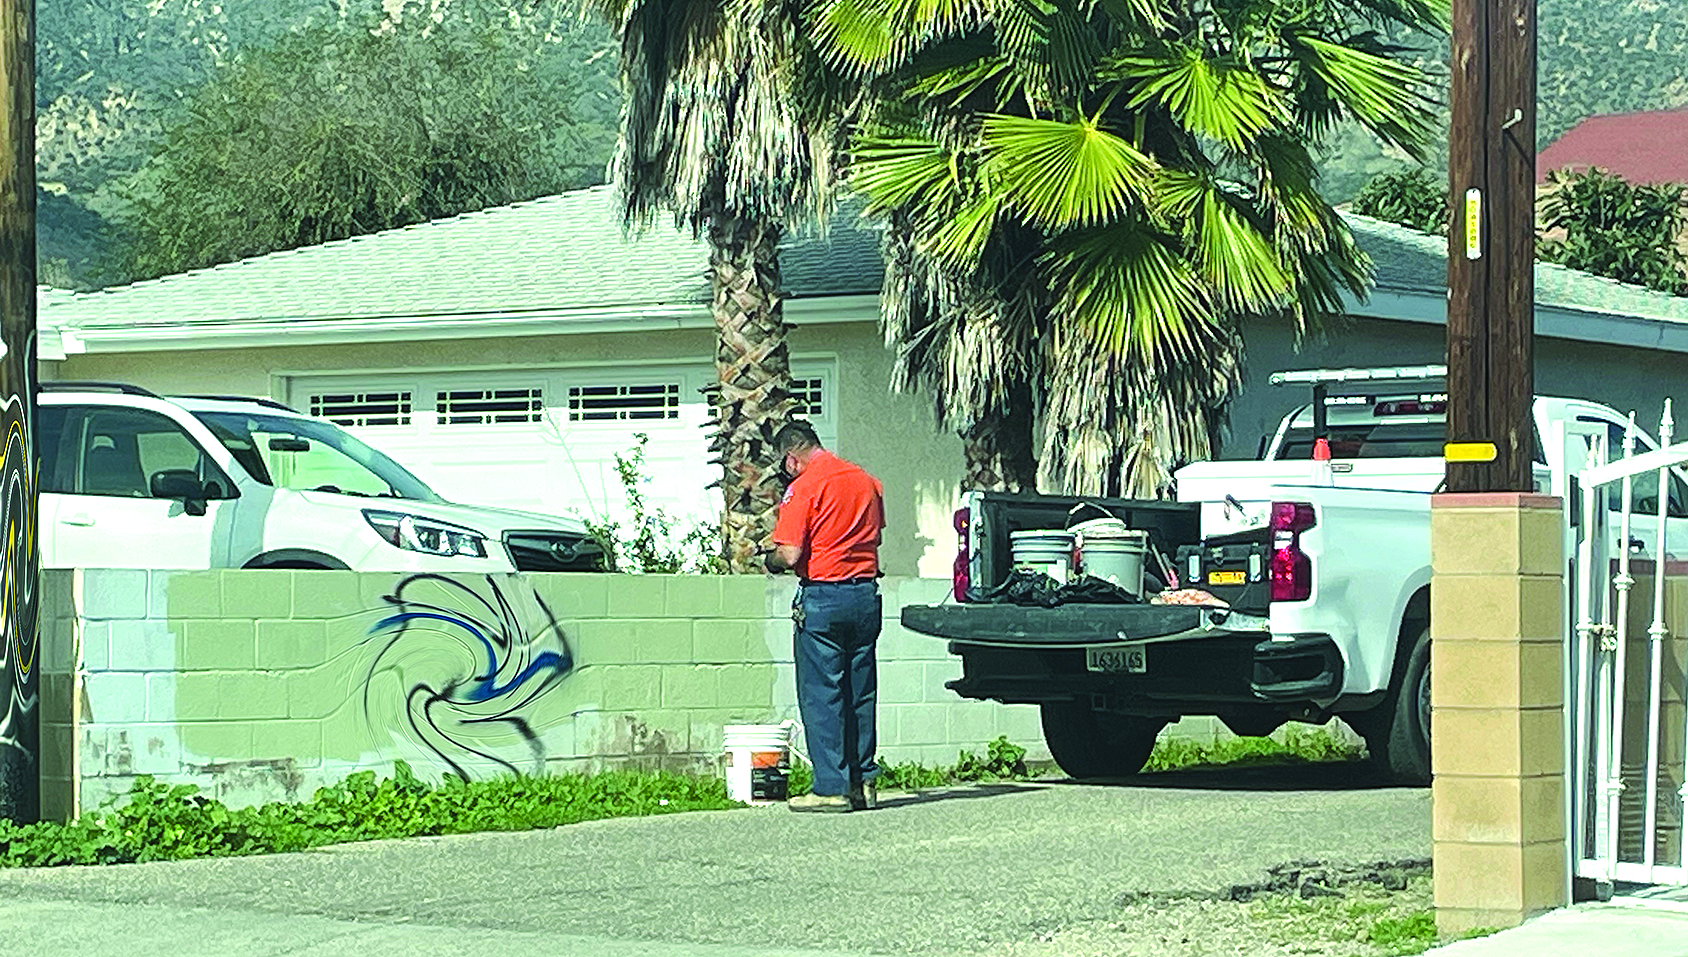 Fillmore City Public Works continues to clean up graffiti vandalism in the city. Here they are at Edison Way and Fourth Street, Tuesday morning, January 30th.